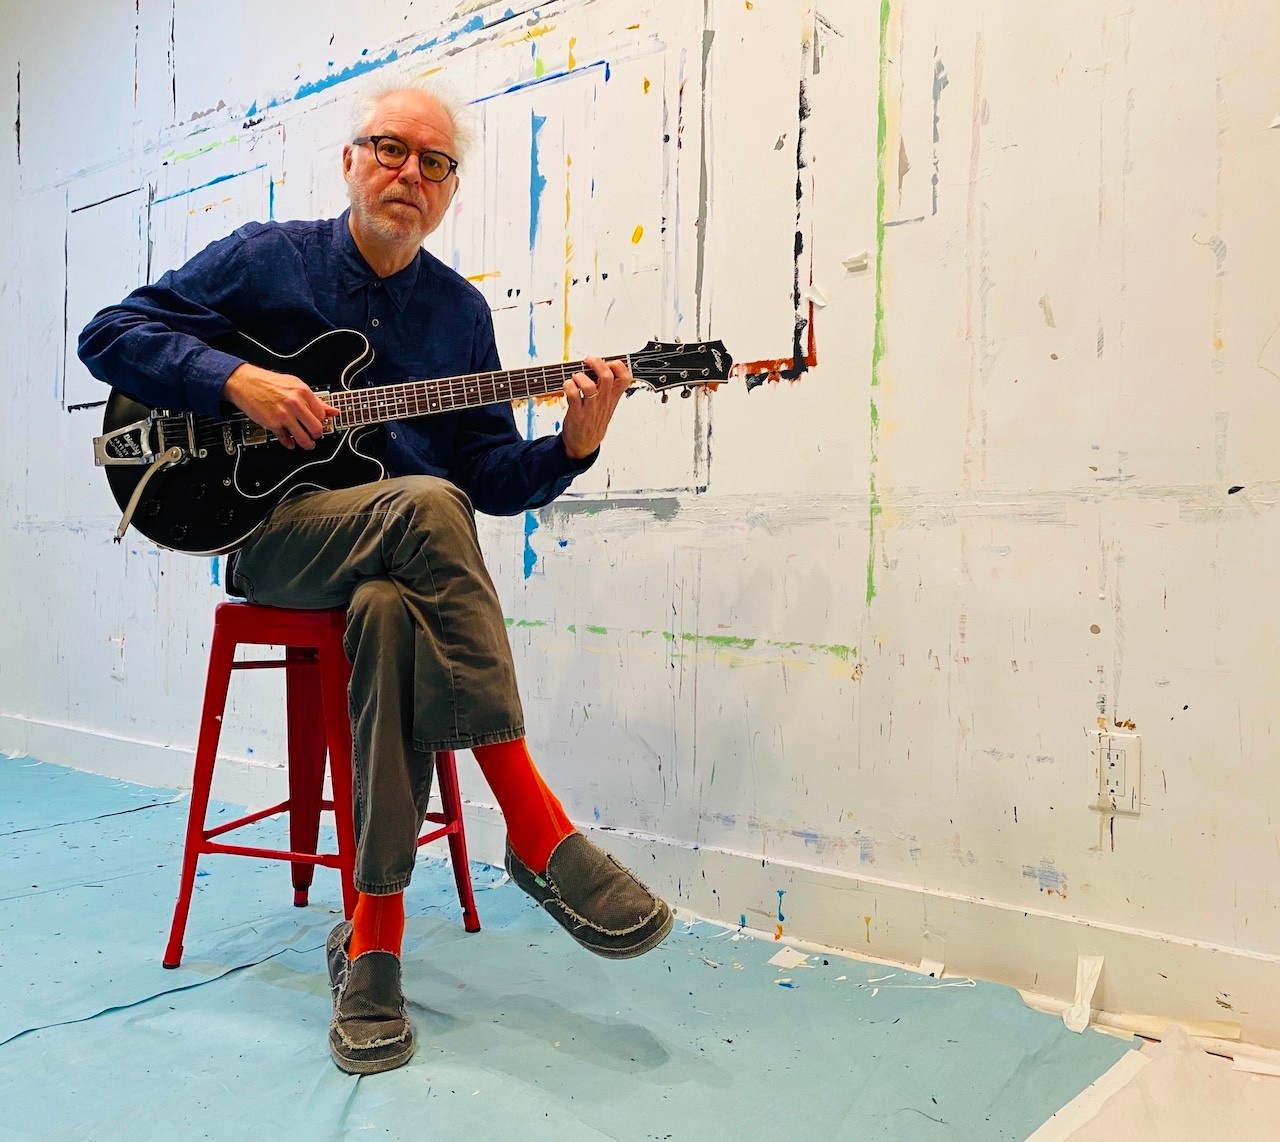 The guitarist Bill Frisell seated on a red stool with one leg crossed over the other where he balances his guitar. He is wearing bright red socks, brown pants, and a blue shirt and is sitting in front of a wall splattered with paint. 